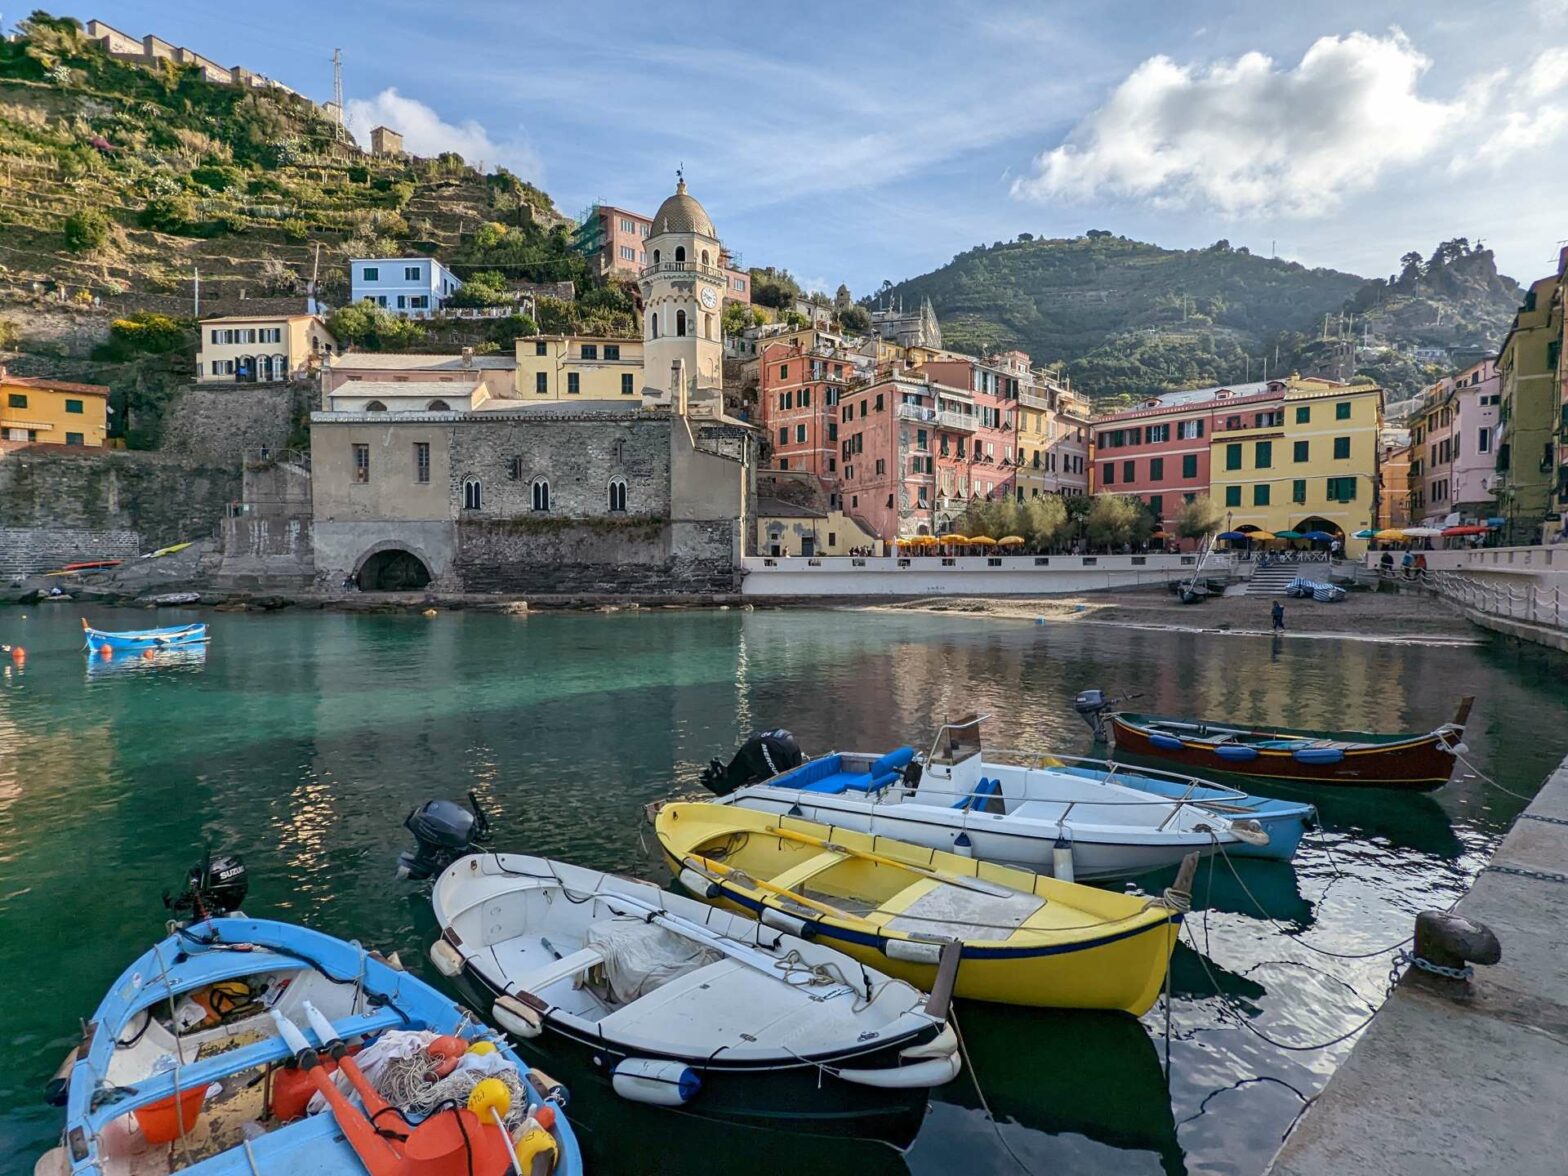 Vernazza town